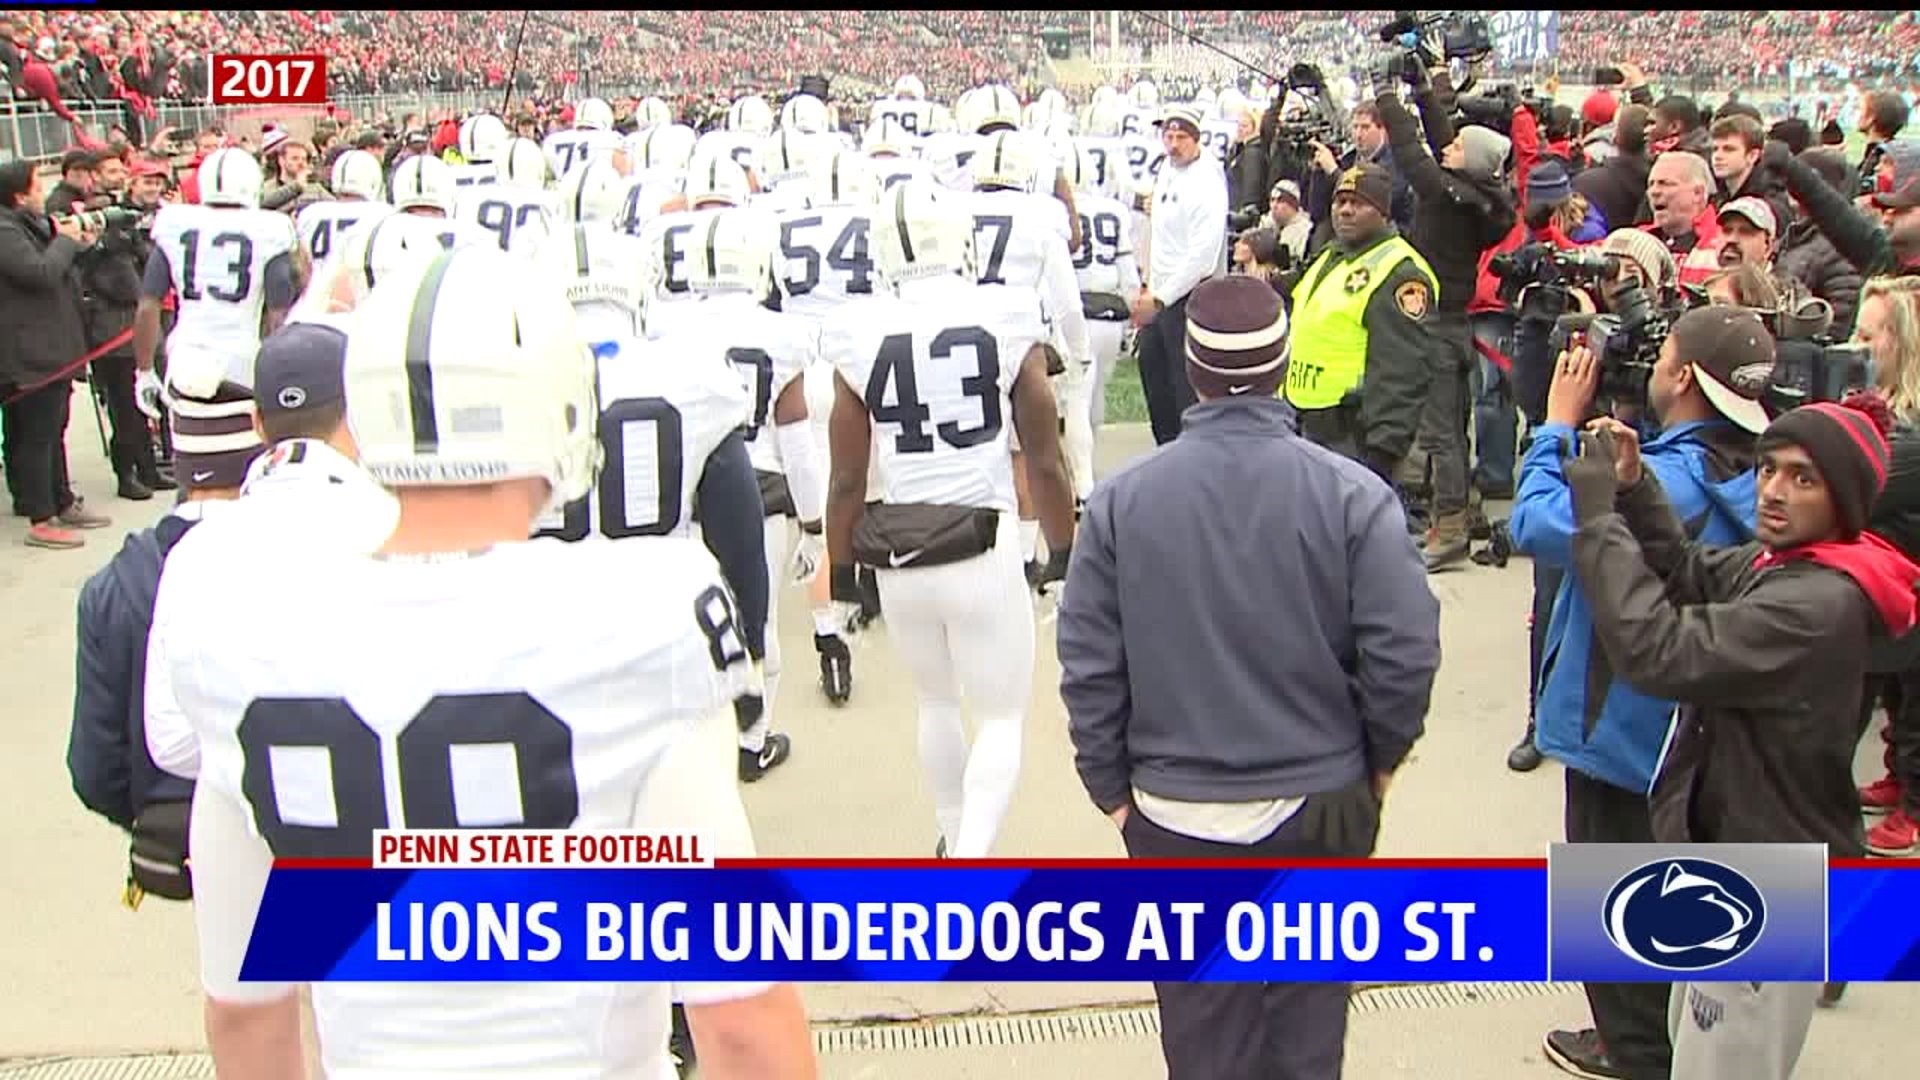 Penn State players not worried about being underdogs heading into matchup with Ohio State